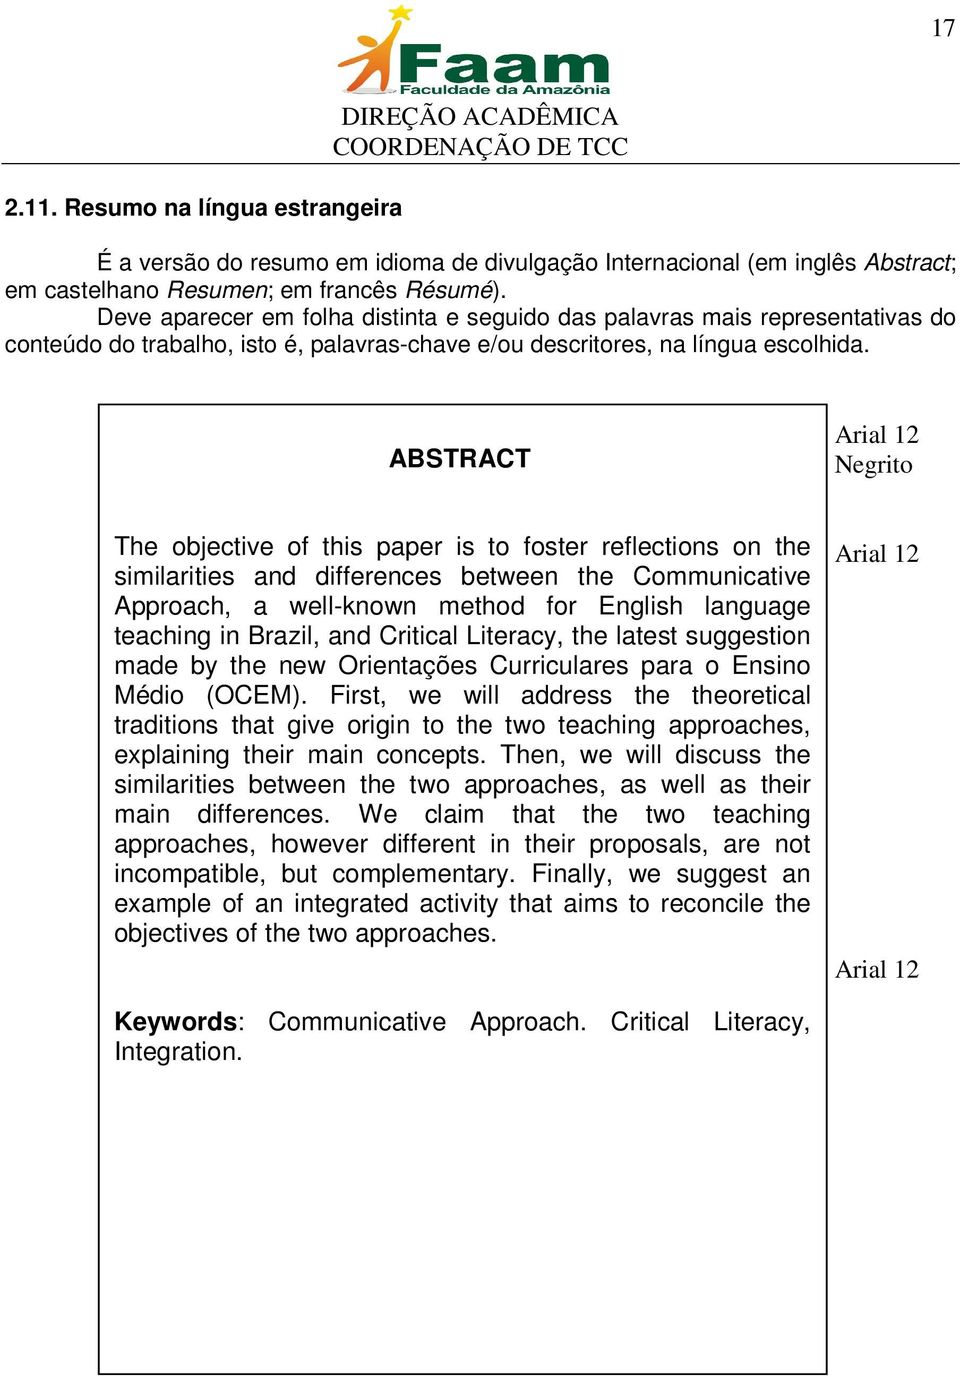 ABSTRACT Arial 12 Negrito The objective of this paper is to foster reflections on the similarities and differences between the Communicative Approach, a well-known method for English language